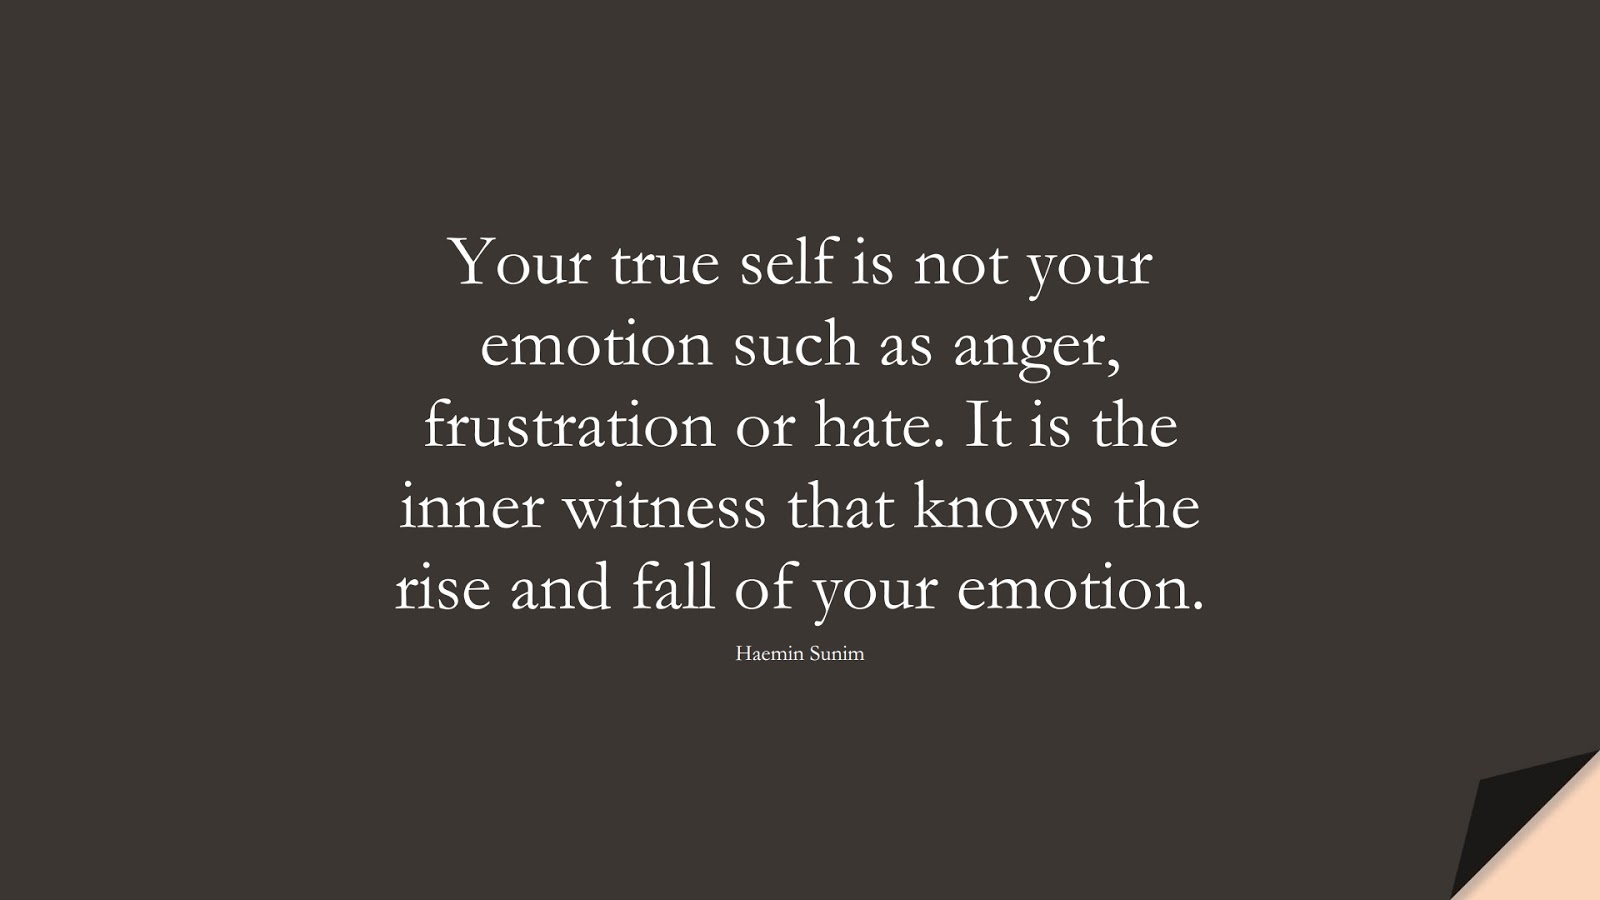 Your true self is not your emotion such as anger, frustration or hate. It is the inner witness that knows the rise and fall of your emotion. (Haemin Sunim);  #StoicQuotes